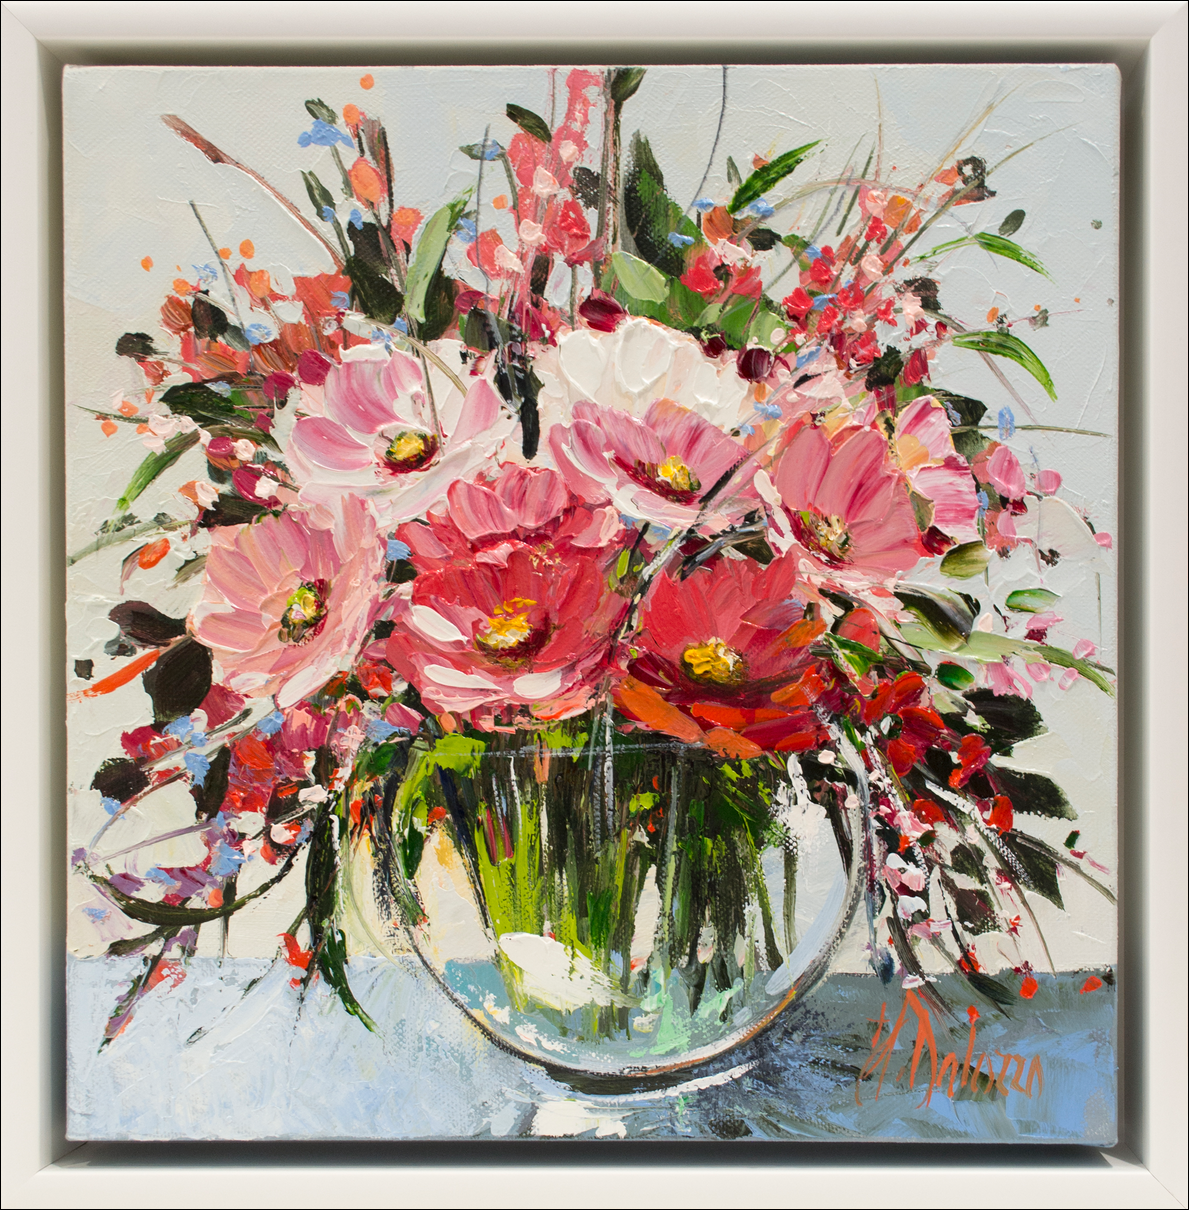 Framed Front View Of Still Life Painting "Fresh Flowers" By Judith Dalozzo